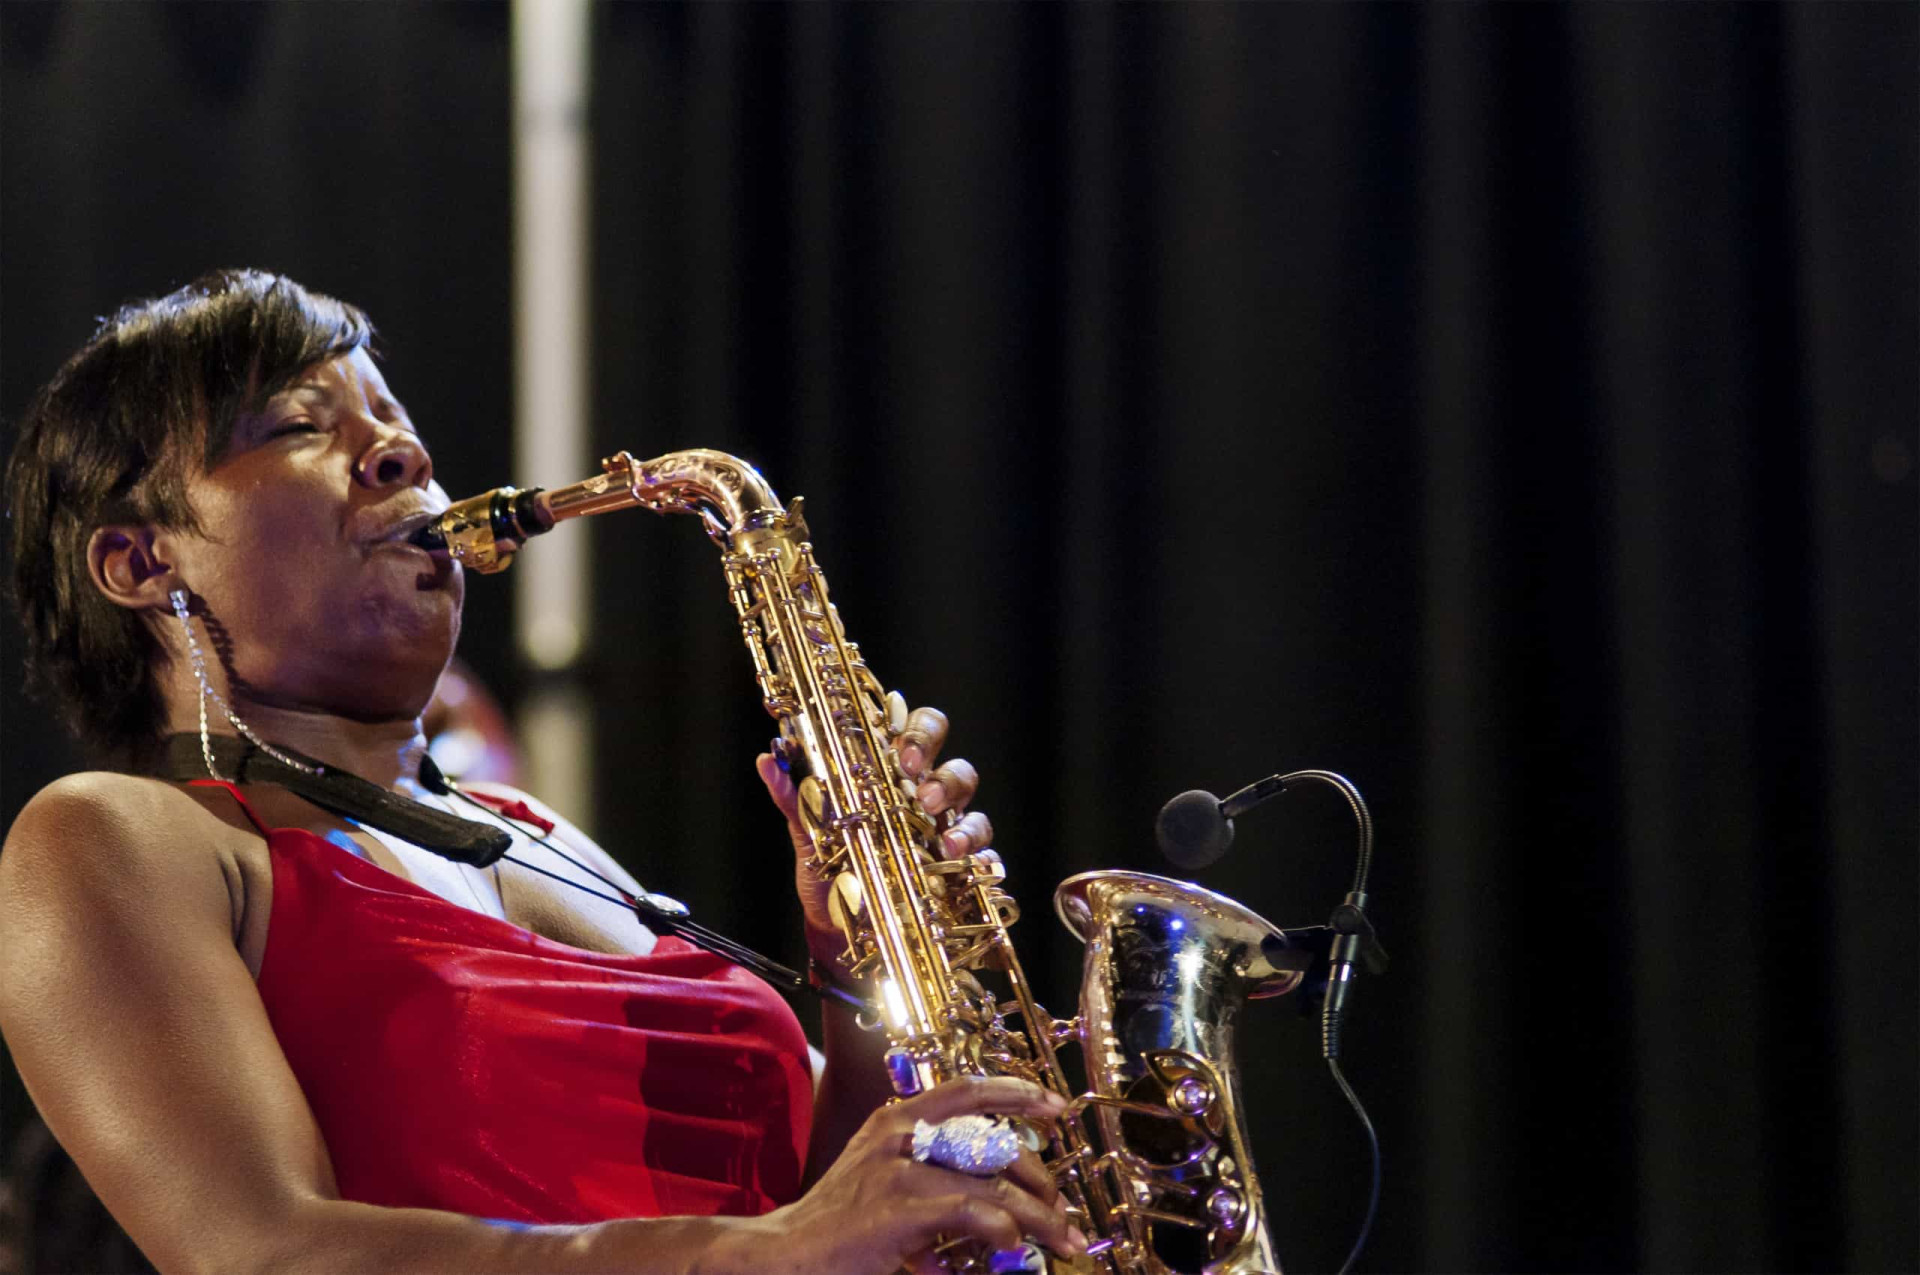 <p>Tia Fuller has used her exceptional saxophone talents to find all sorts of fame for herself. While best known for being a permanent member of Beyoncé's touring band, Fuller's virtuosic playing was also featured in Pixar's 2020 animated hit 'Soul'.</p><p><a href="https://www.msn.com/en-sg/community/channel/vid-7xx8mnucu55yw63we9va2gwr7uihbxwc68fxqp25x6tg4ftibpra?cvid=94631541bc0f4f89bfd59158d696ad7e">Follow us and access great exclusive content every day</a></p>